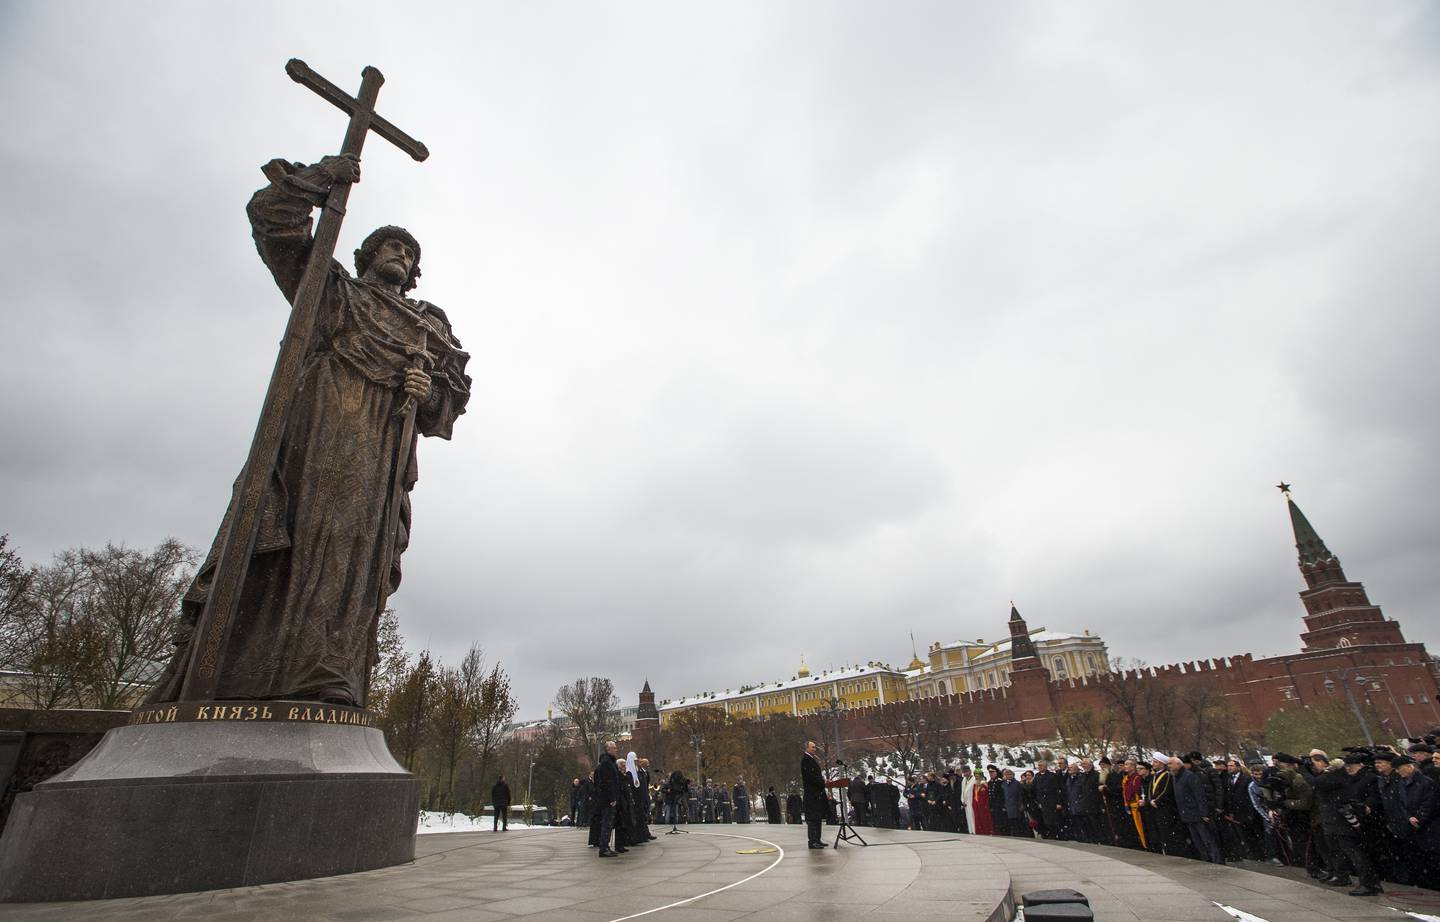 Russian President Vladimir Putin speaks at the unveiling ceremony of a monument to Vladimir the Great on the National Unity Day outside the Kremlin in Moscow, Russia, Friday, Nov. 4, 2016. President Vladimir Putin has led ceremonies launching a large statue outside the Kremlin to a 10th-century prince of Kiev who is credited with making Orthodox Christianity the official faith of Russia, Ukraine and Belarus. (AP Photo/Alexander Zemlianichenko)